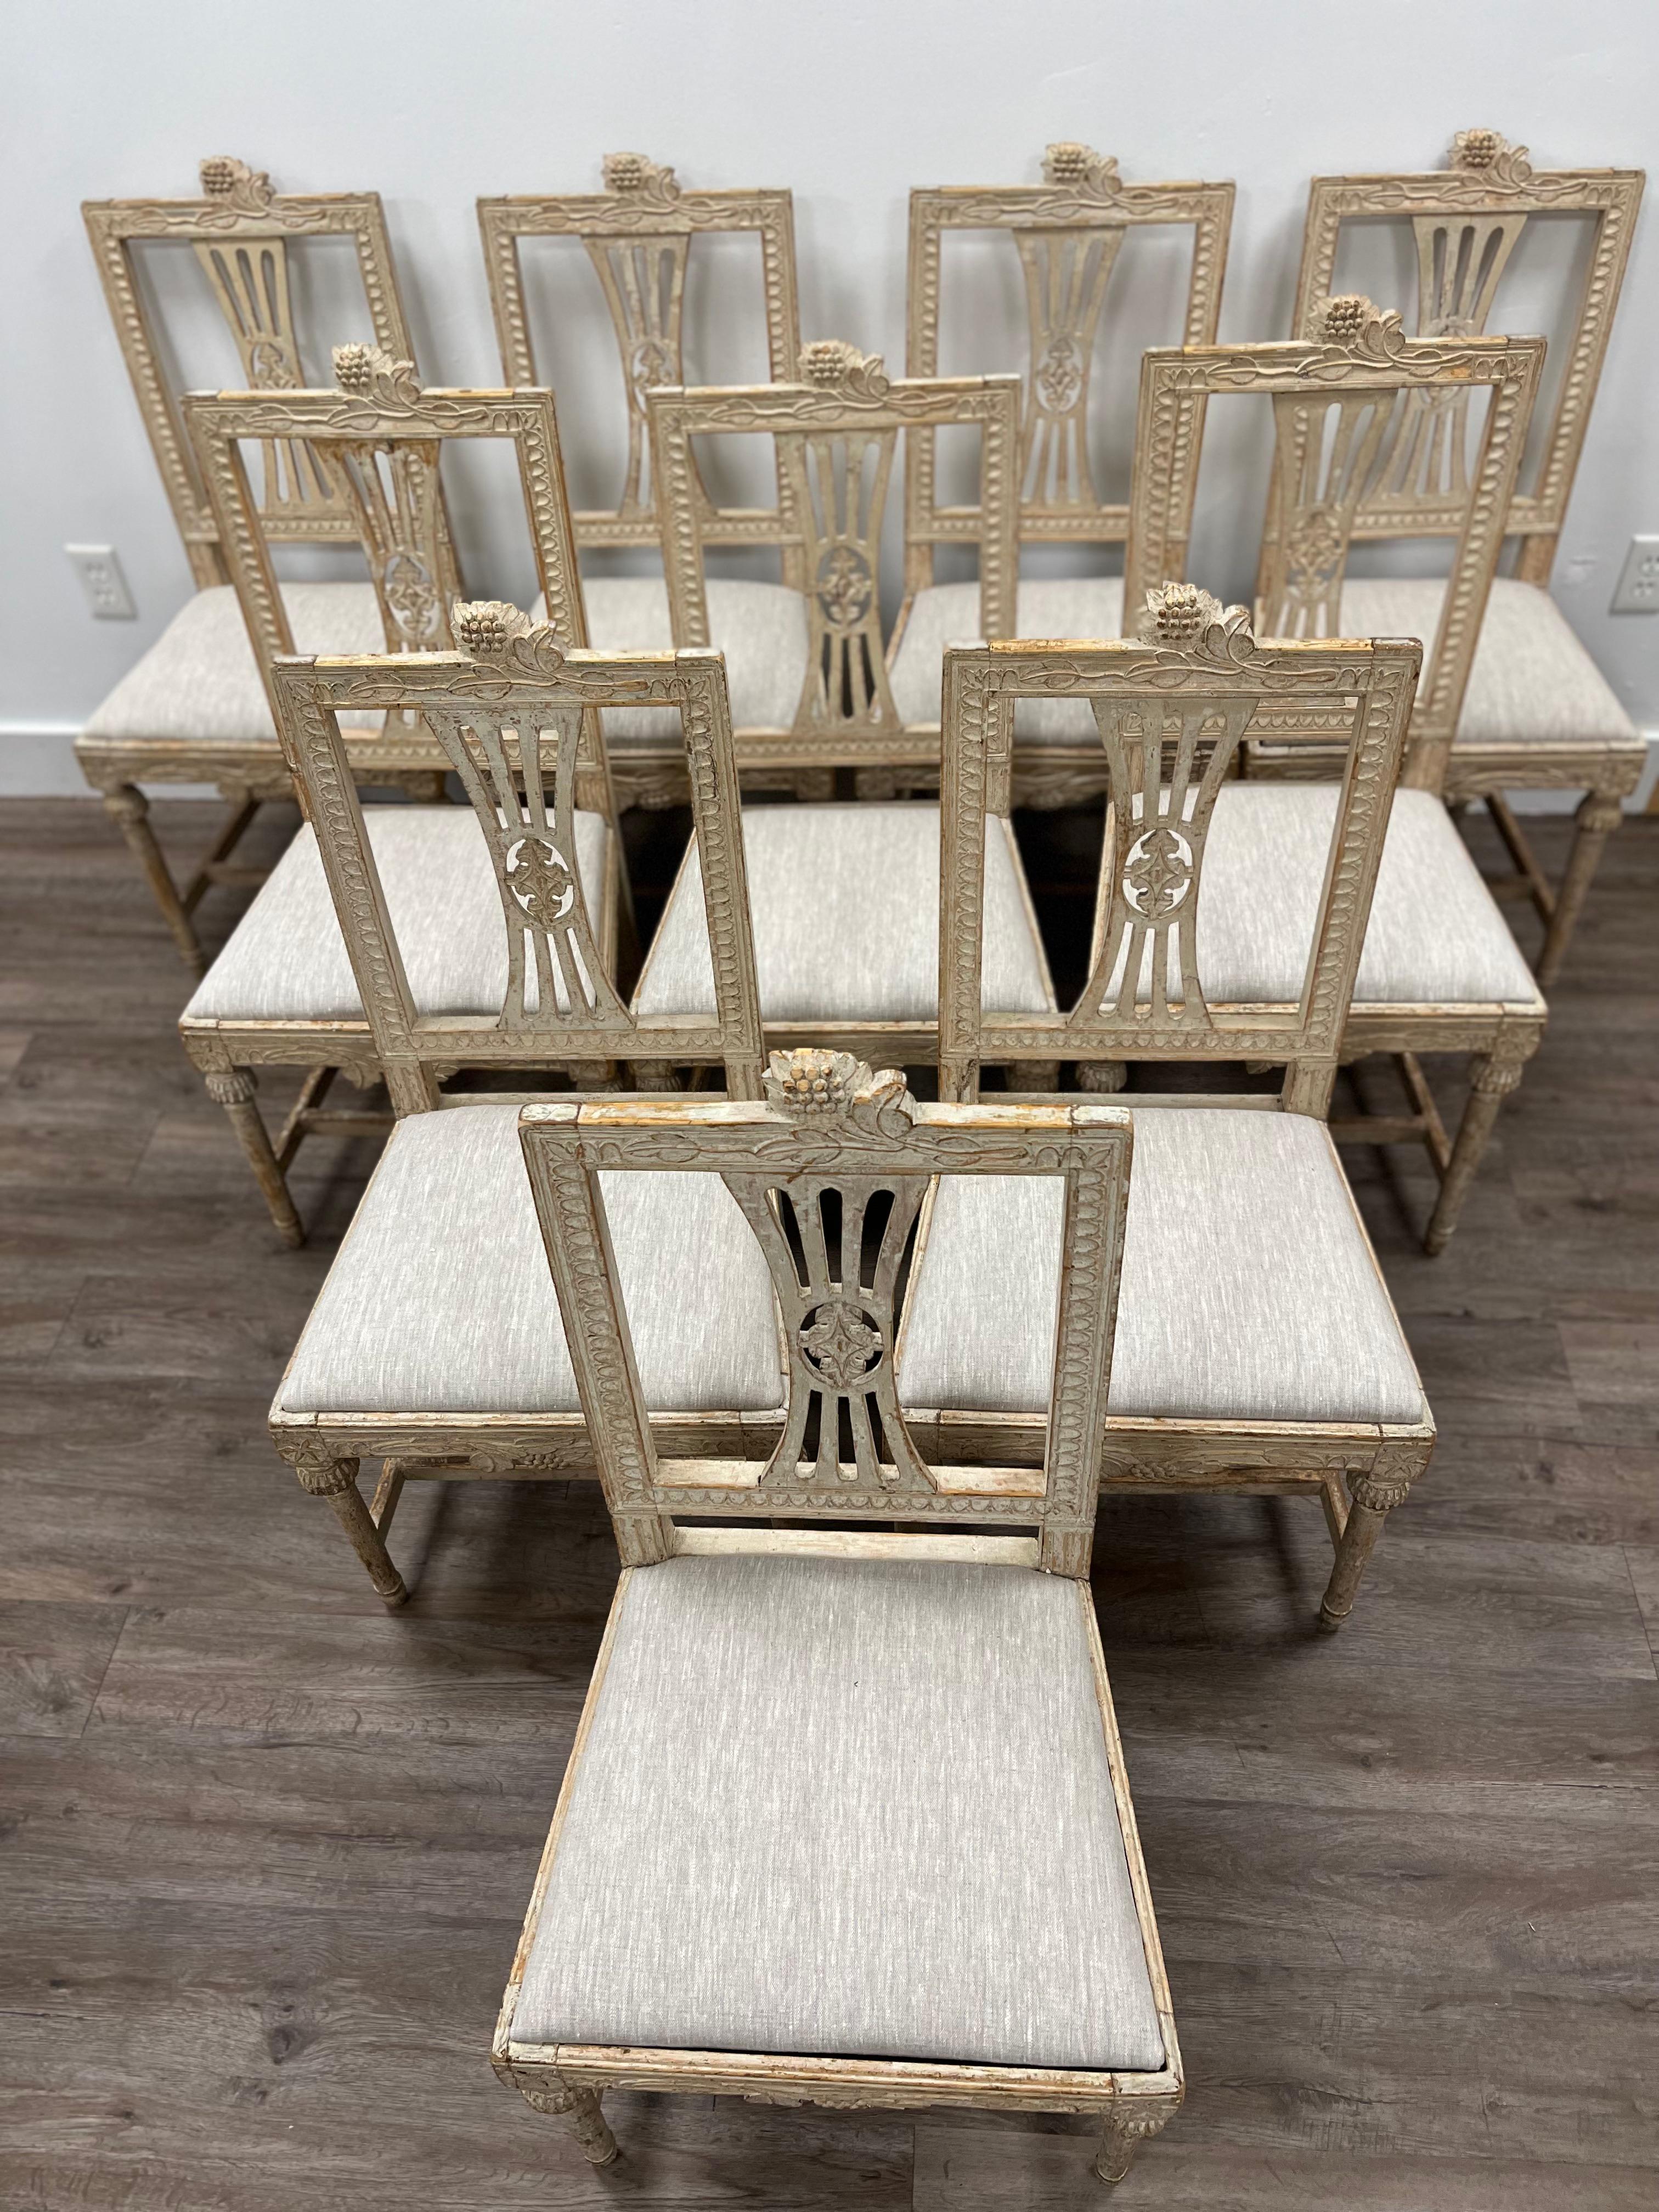 A rare and stunning set of ten Swedish Late Gustavian chairs made in Lindome. Rectangular back with leaf cut detailing on three sides. The top has a floral motif leading to a crown of hops. Back tray in the form of connected slotted pieces surrounds